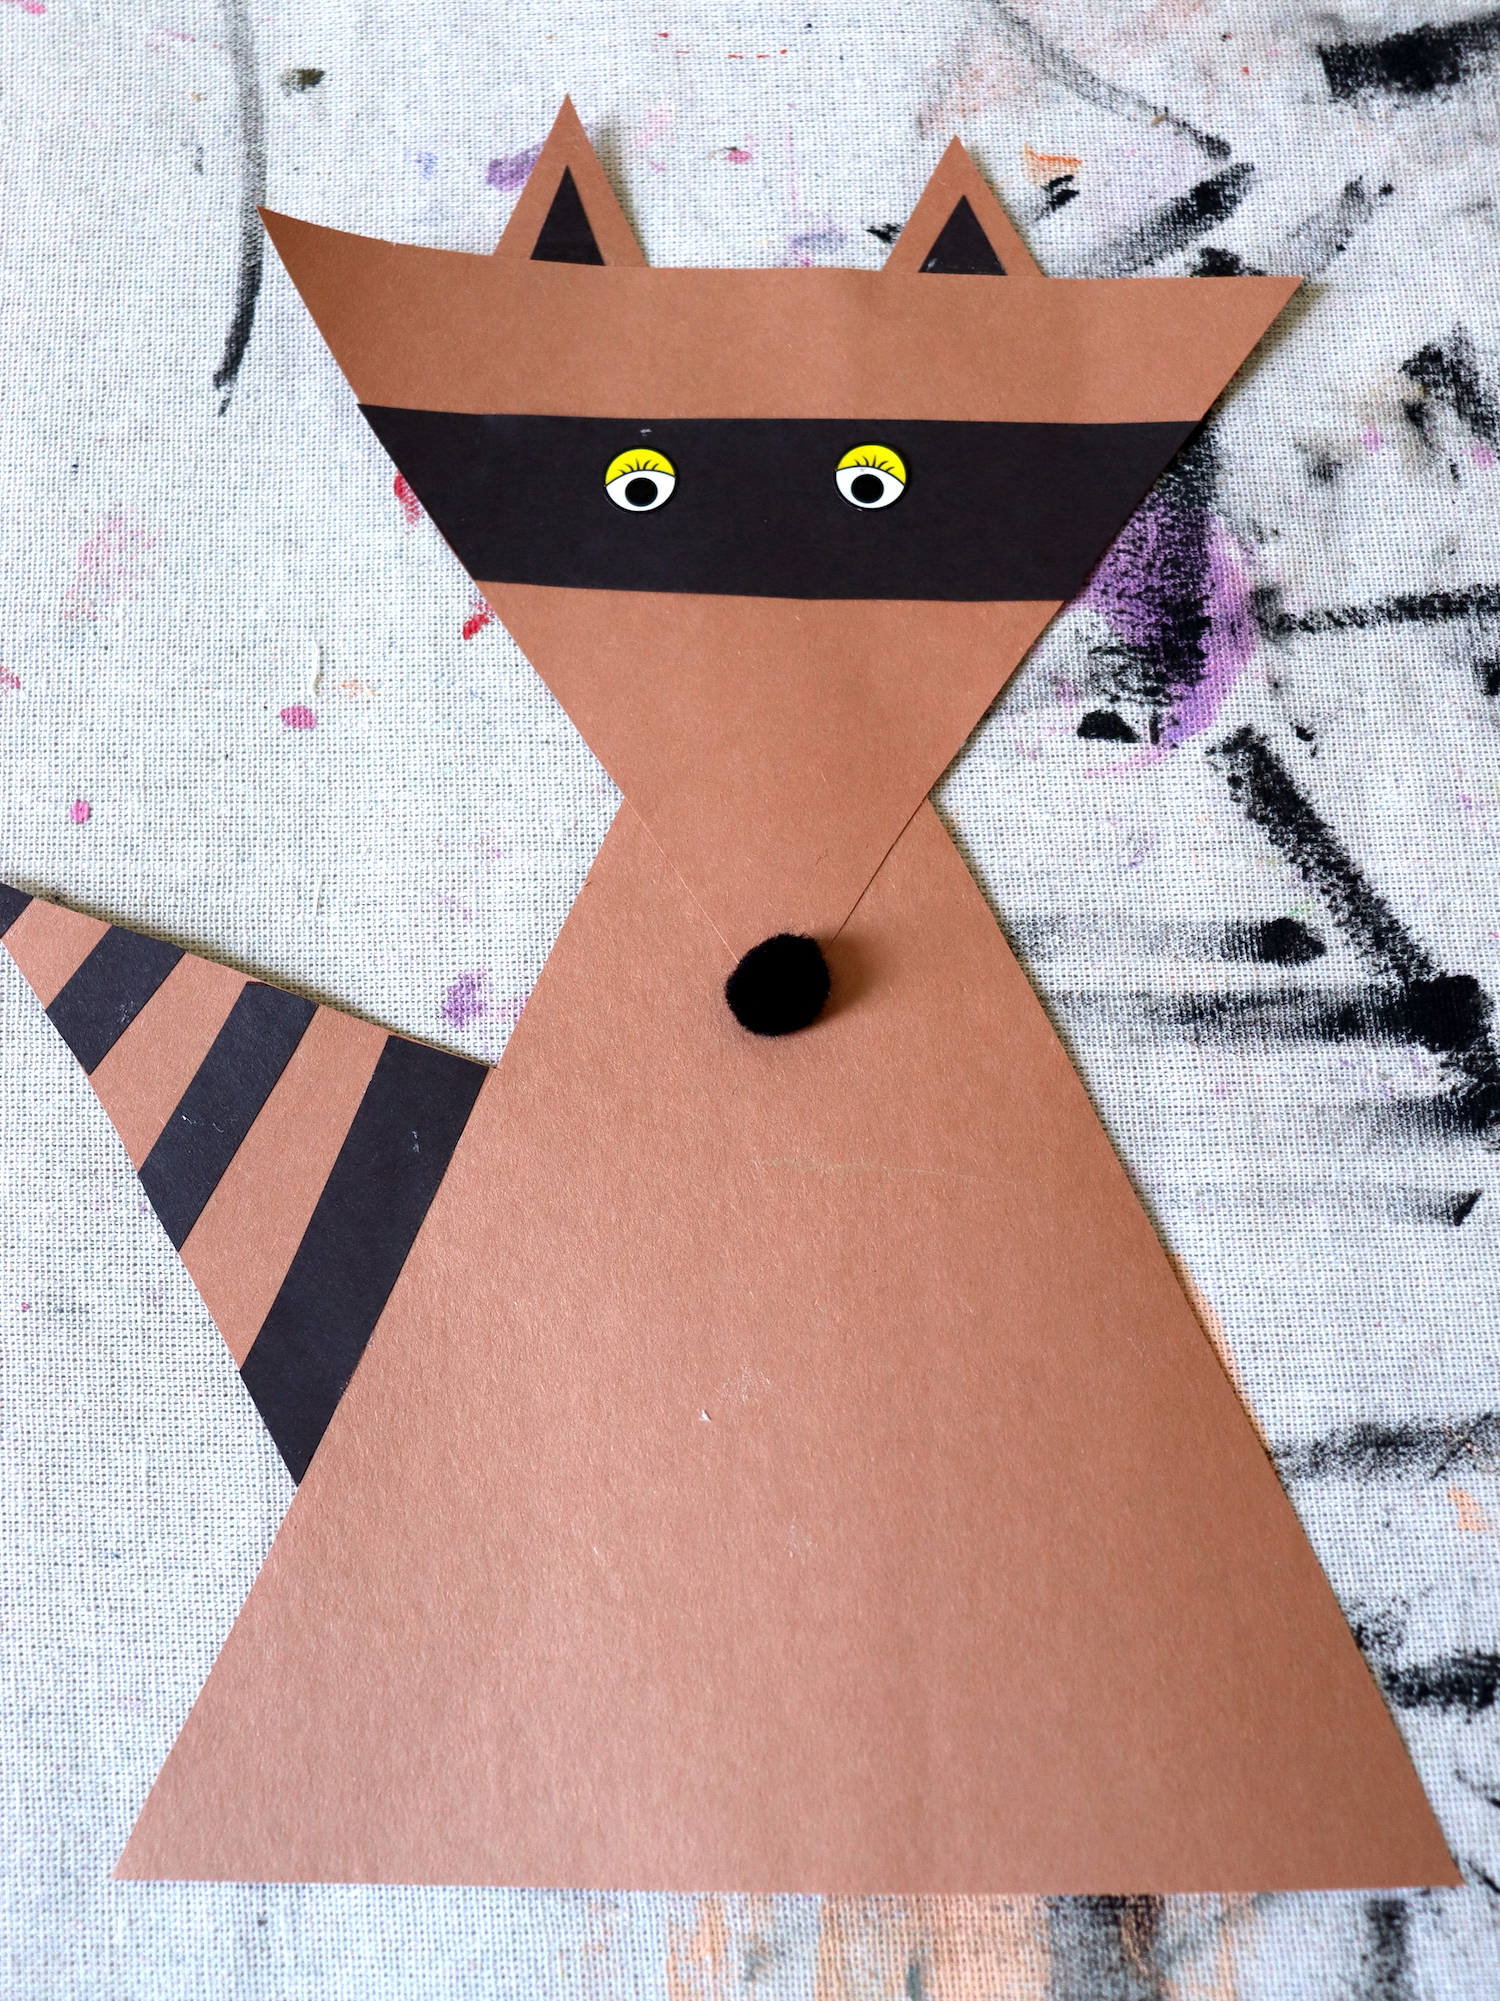 Photo depicting a raccoon craft made out of brown and black construction paper.